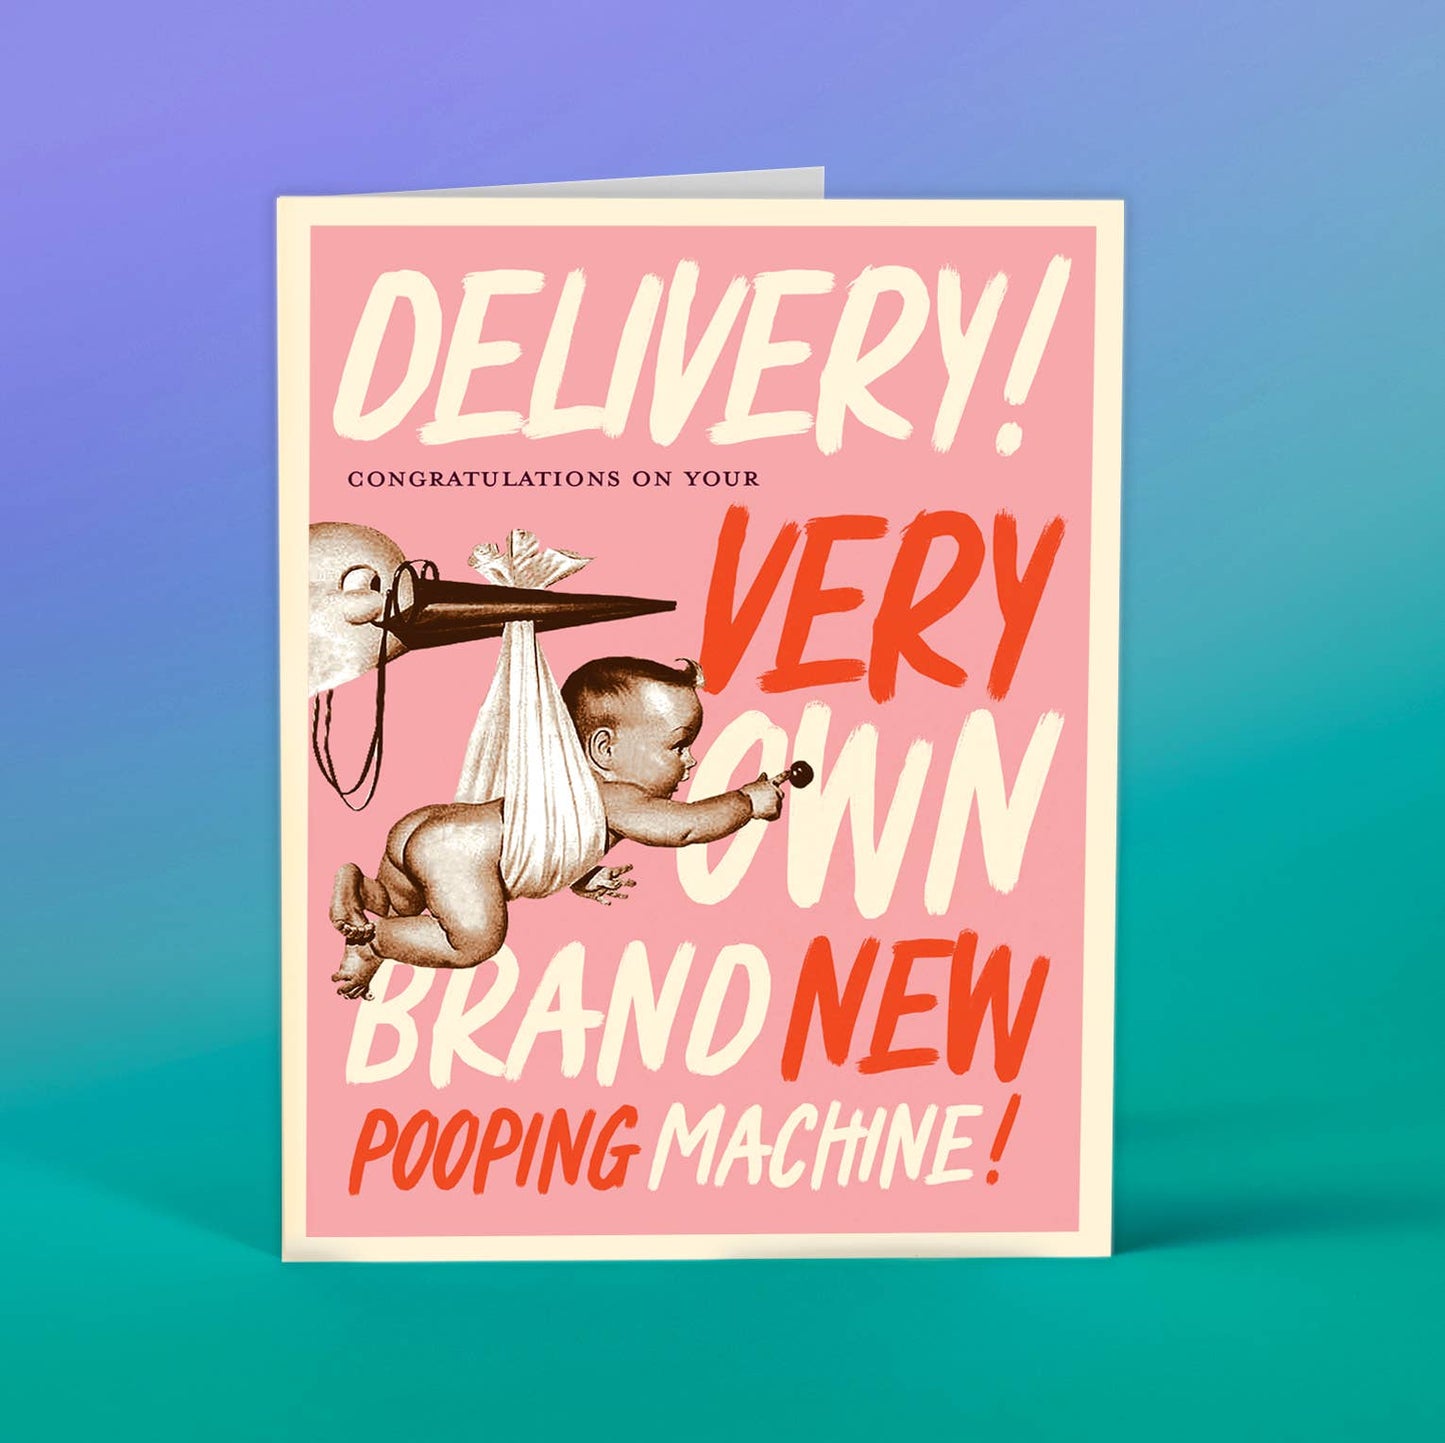 Pooping Machine Delivery Greeting Card